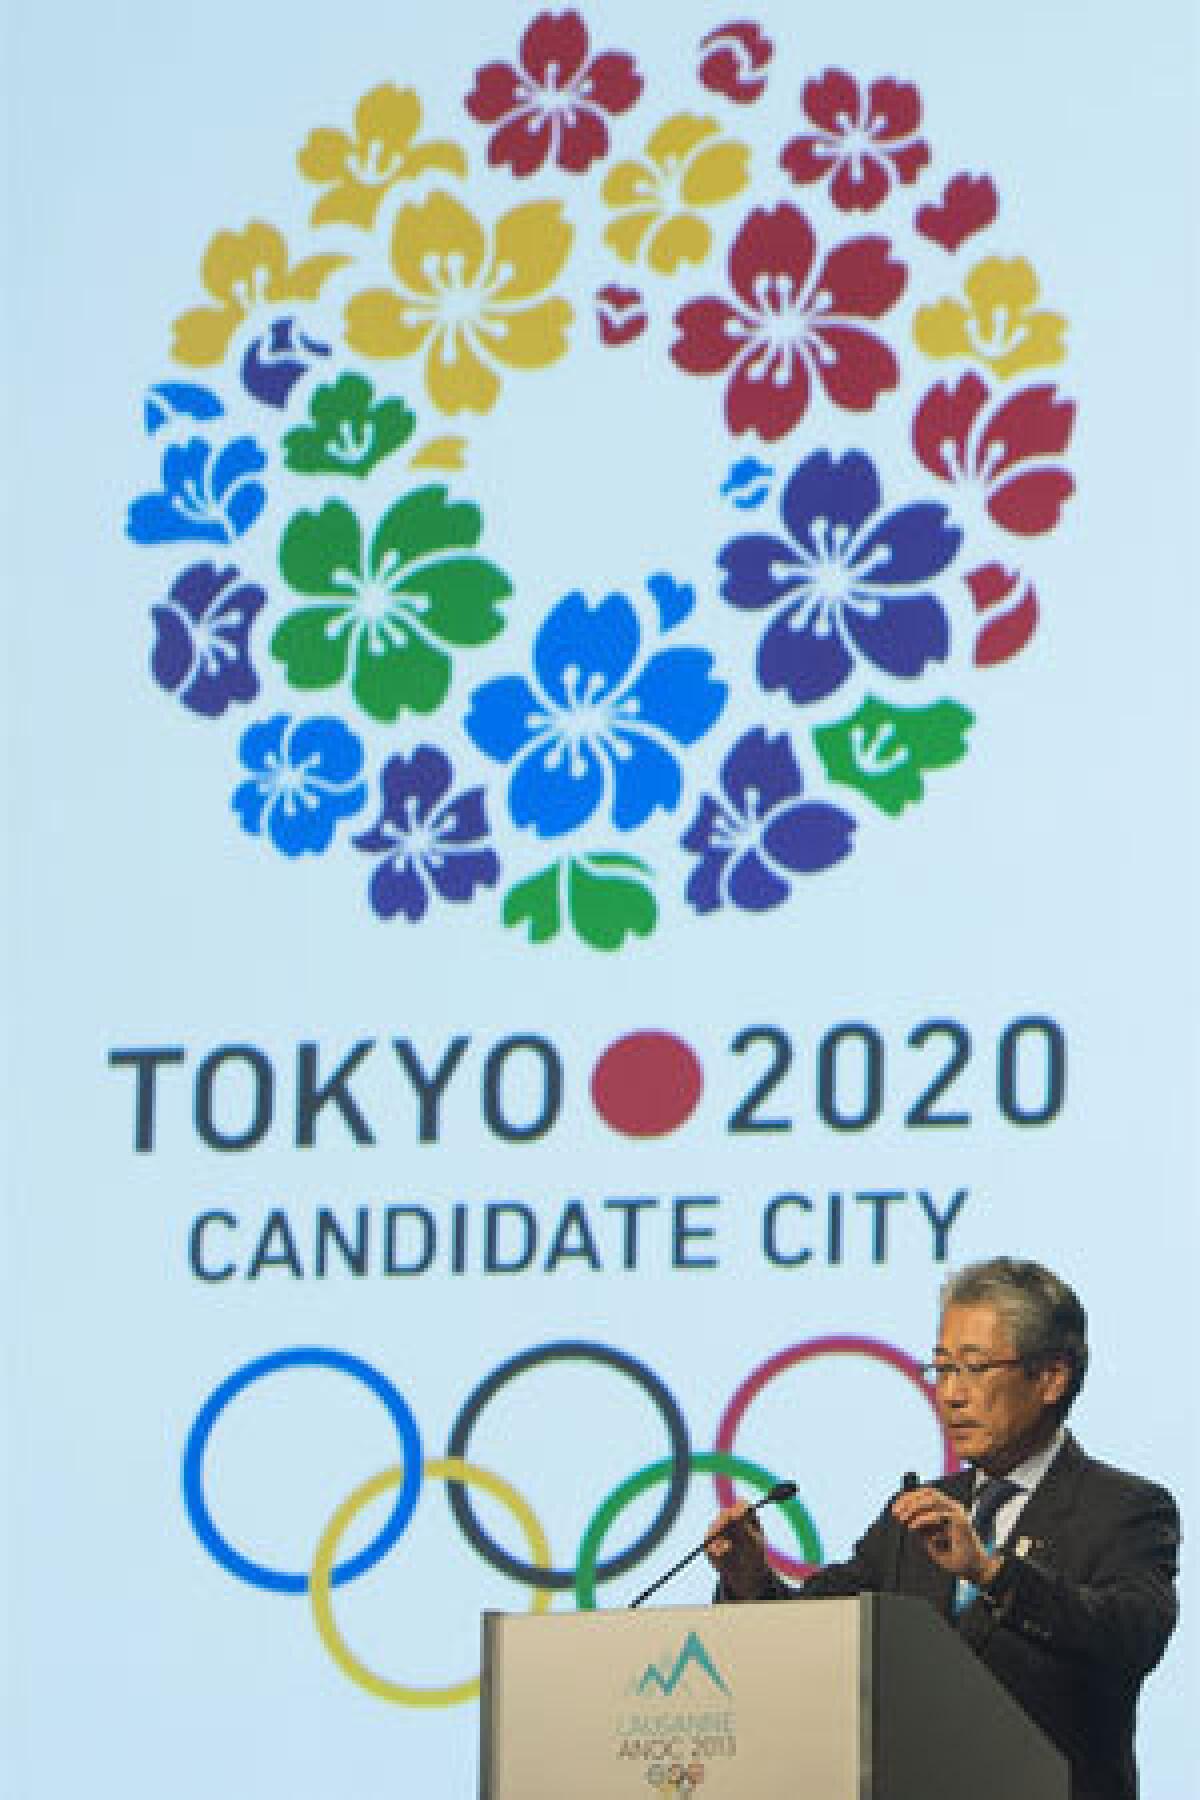 Tsunekazu Takeda, president of Tokyo 2020 organization, speaks during the presentation of the candidate cities for the 2020 Olympic Games during the Association of National Olympic Committees Extraordinary General Assembly at the Beaulieu Congress Hall, in Lausanne, Switzerland, on June 15.